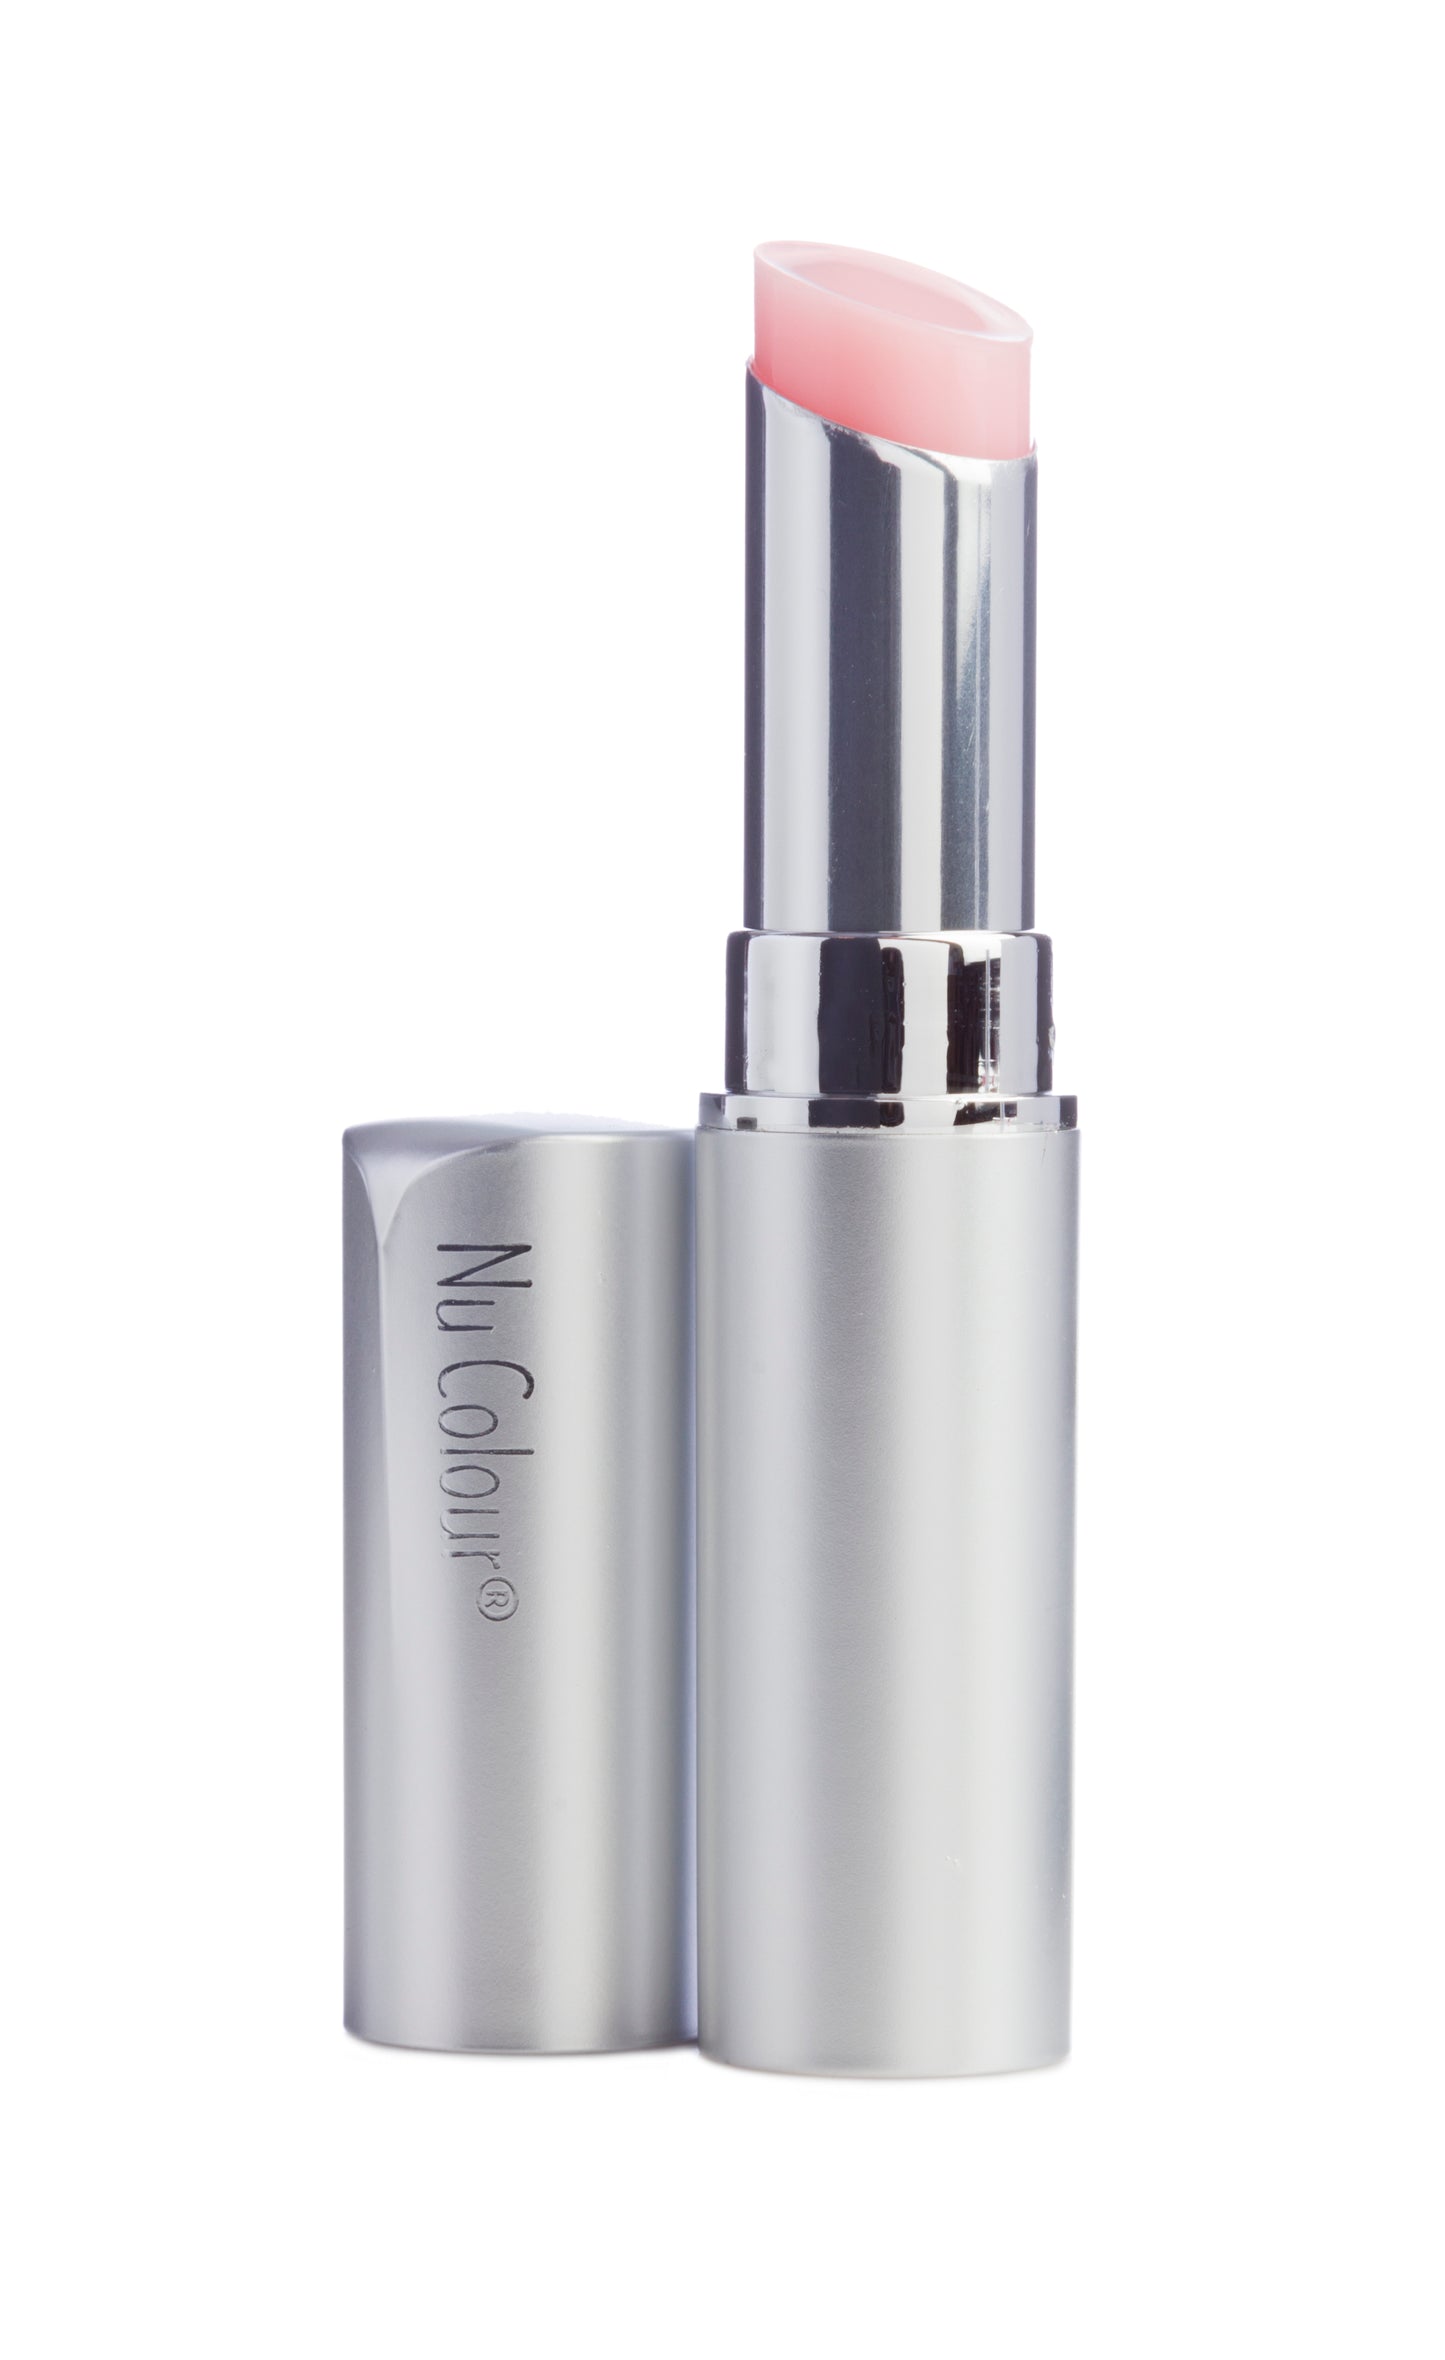 Lip Plumping Balm from Nu Skin make the lips appear fuller.